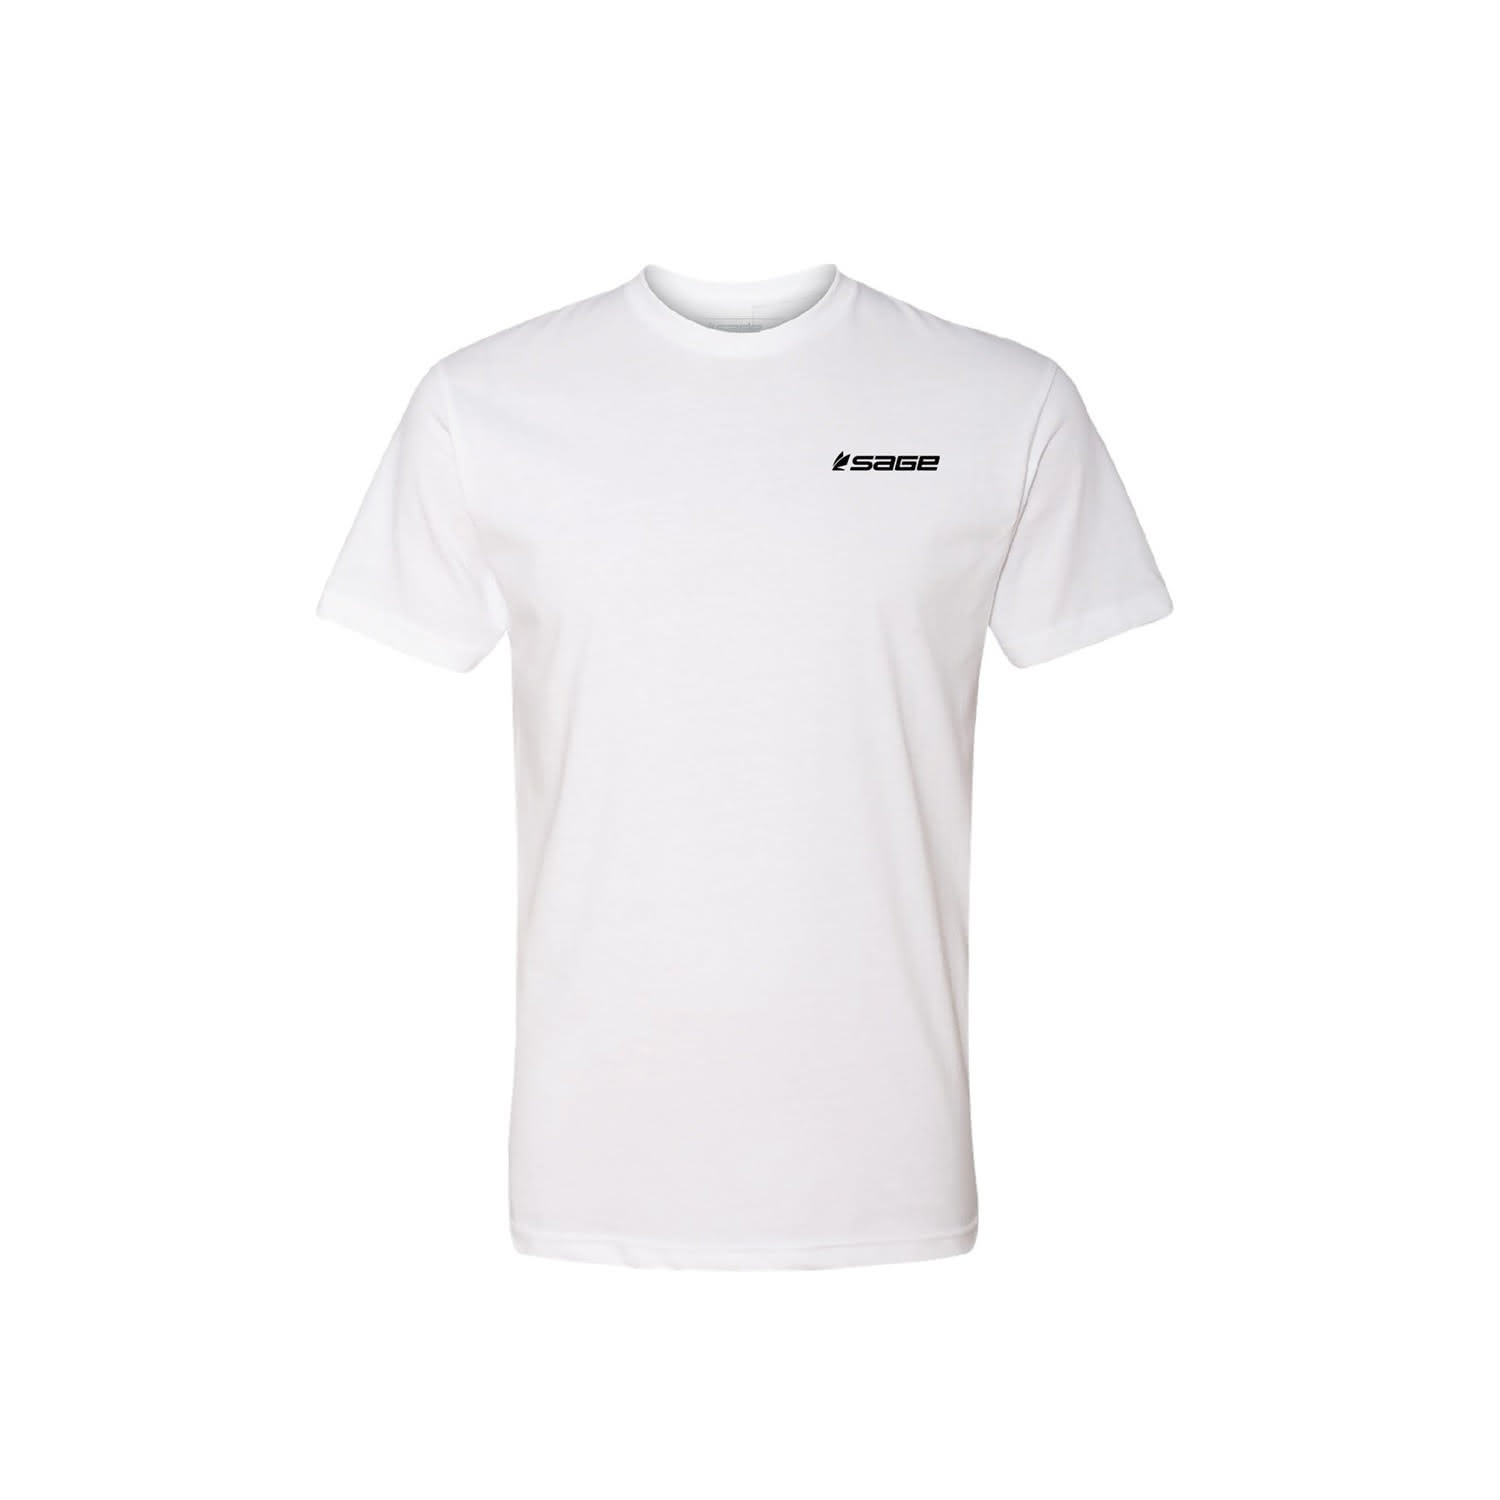 Dripping Fish Tee Trout (white)